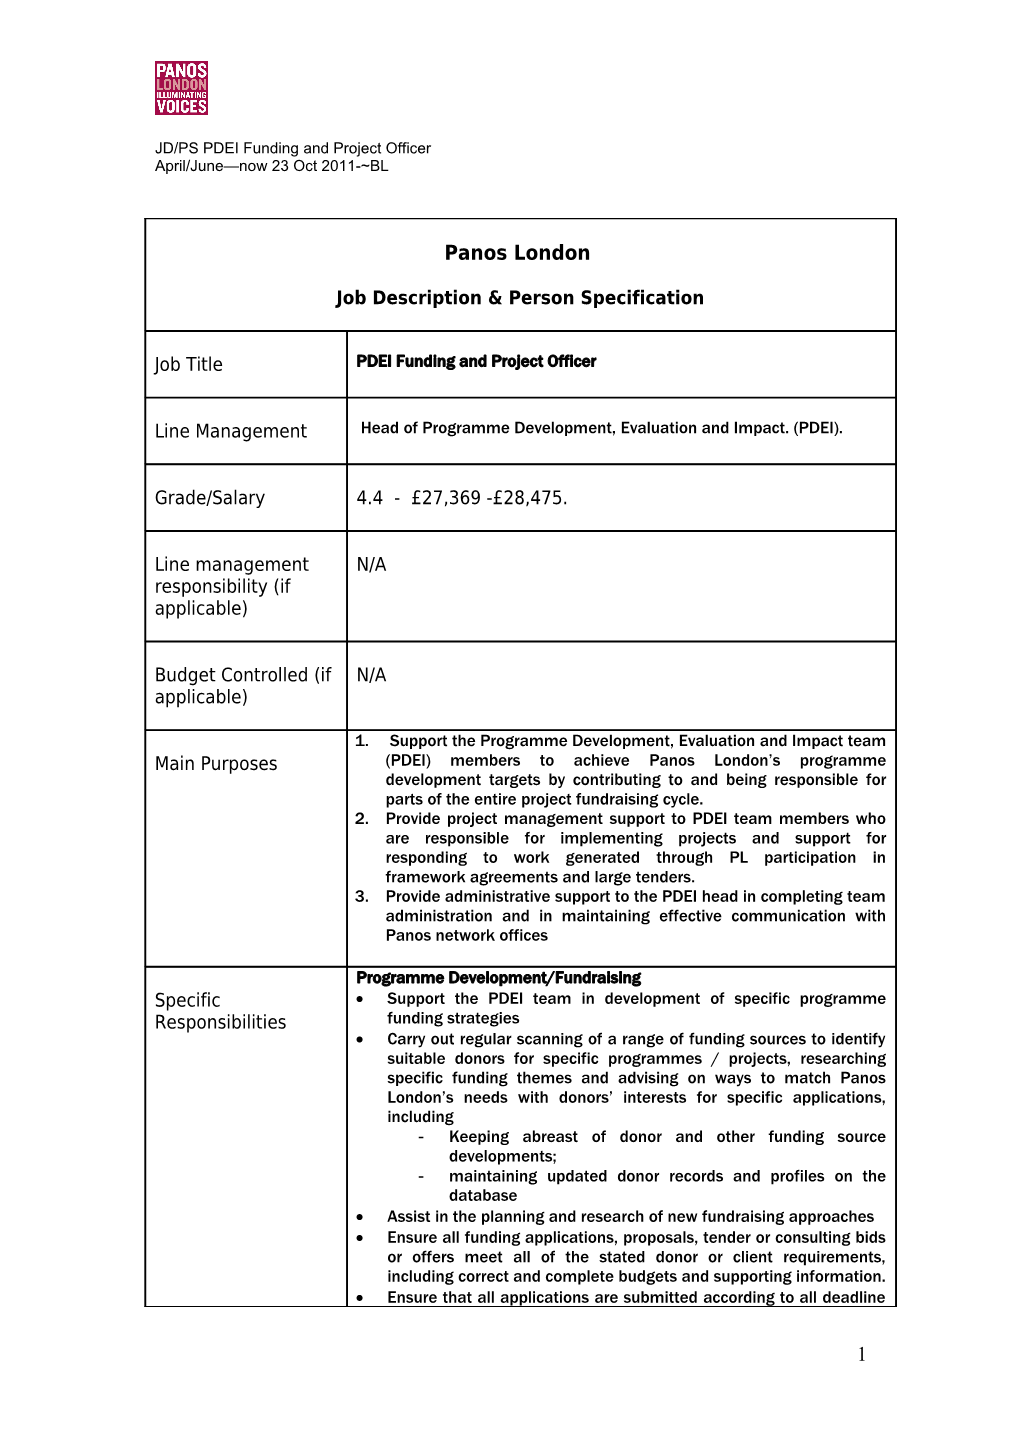 JD/PS PDEI Funding and Project Officer